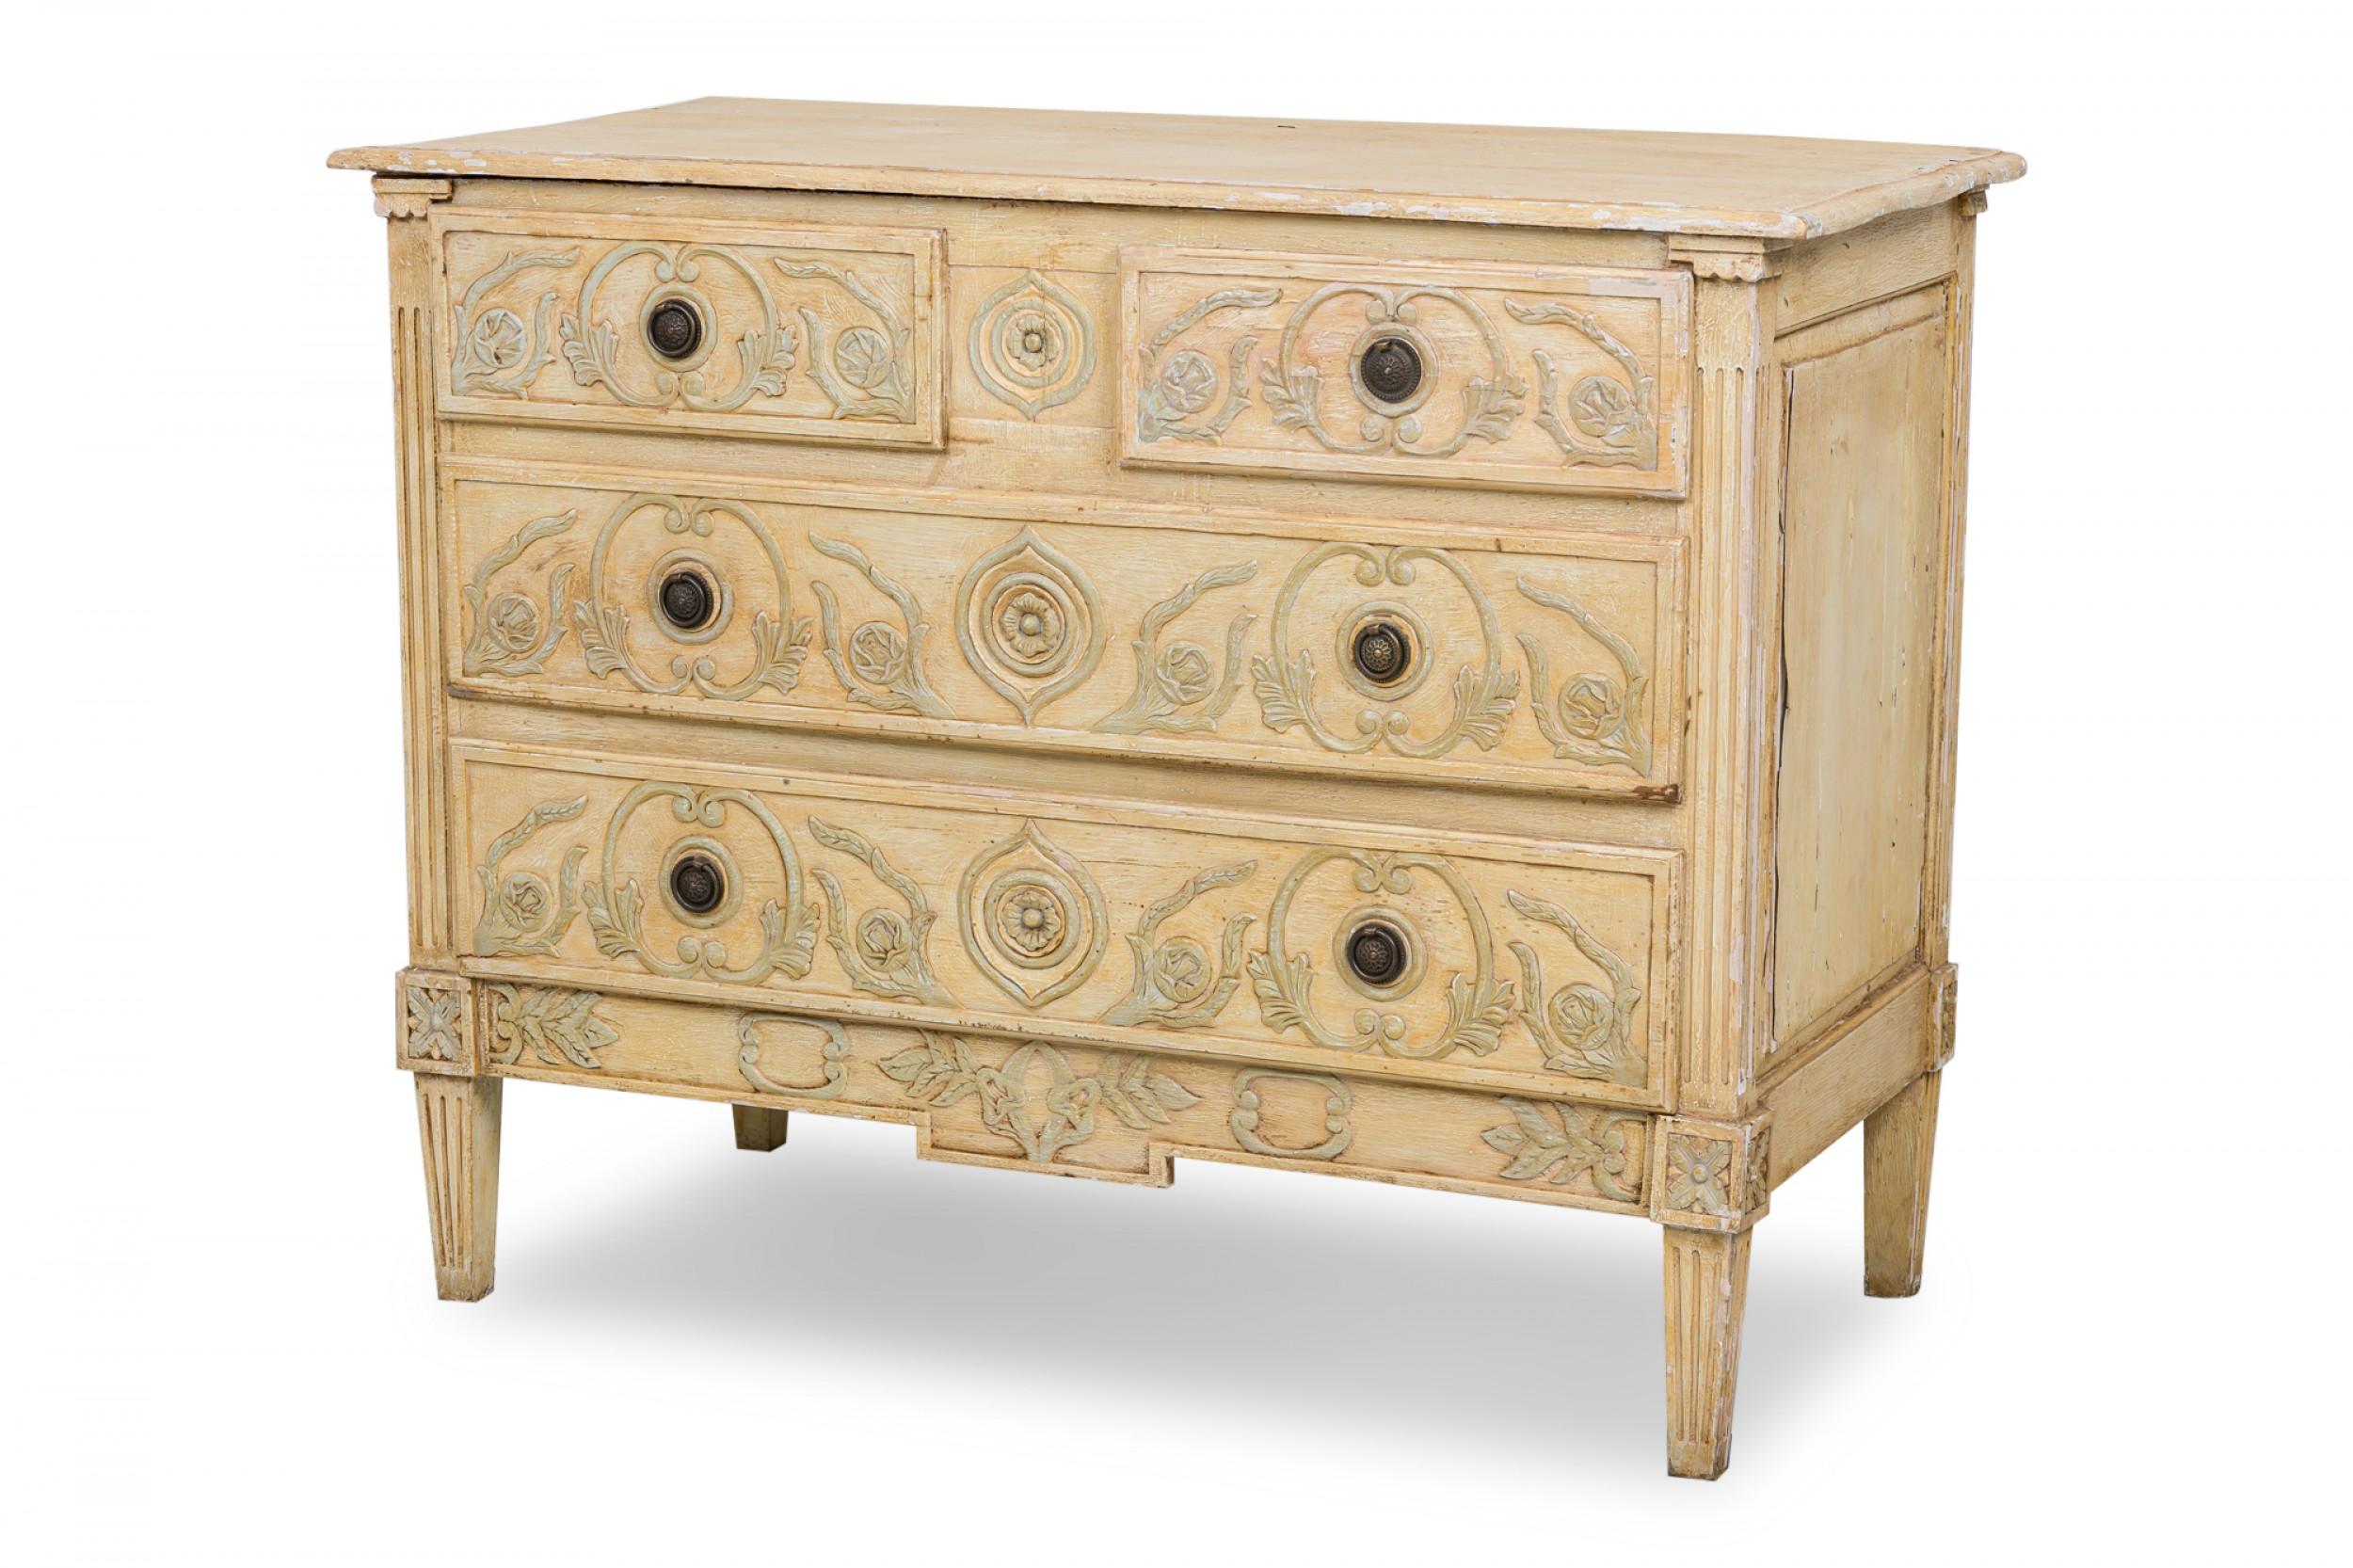 French Louis XVI Provincial commode with a painted beige and gray finish, two smaller upper drawers and two wider lower drawers with antiqued bronze ring drawer pulls.